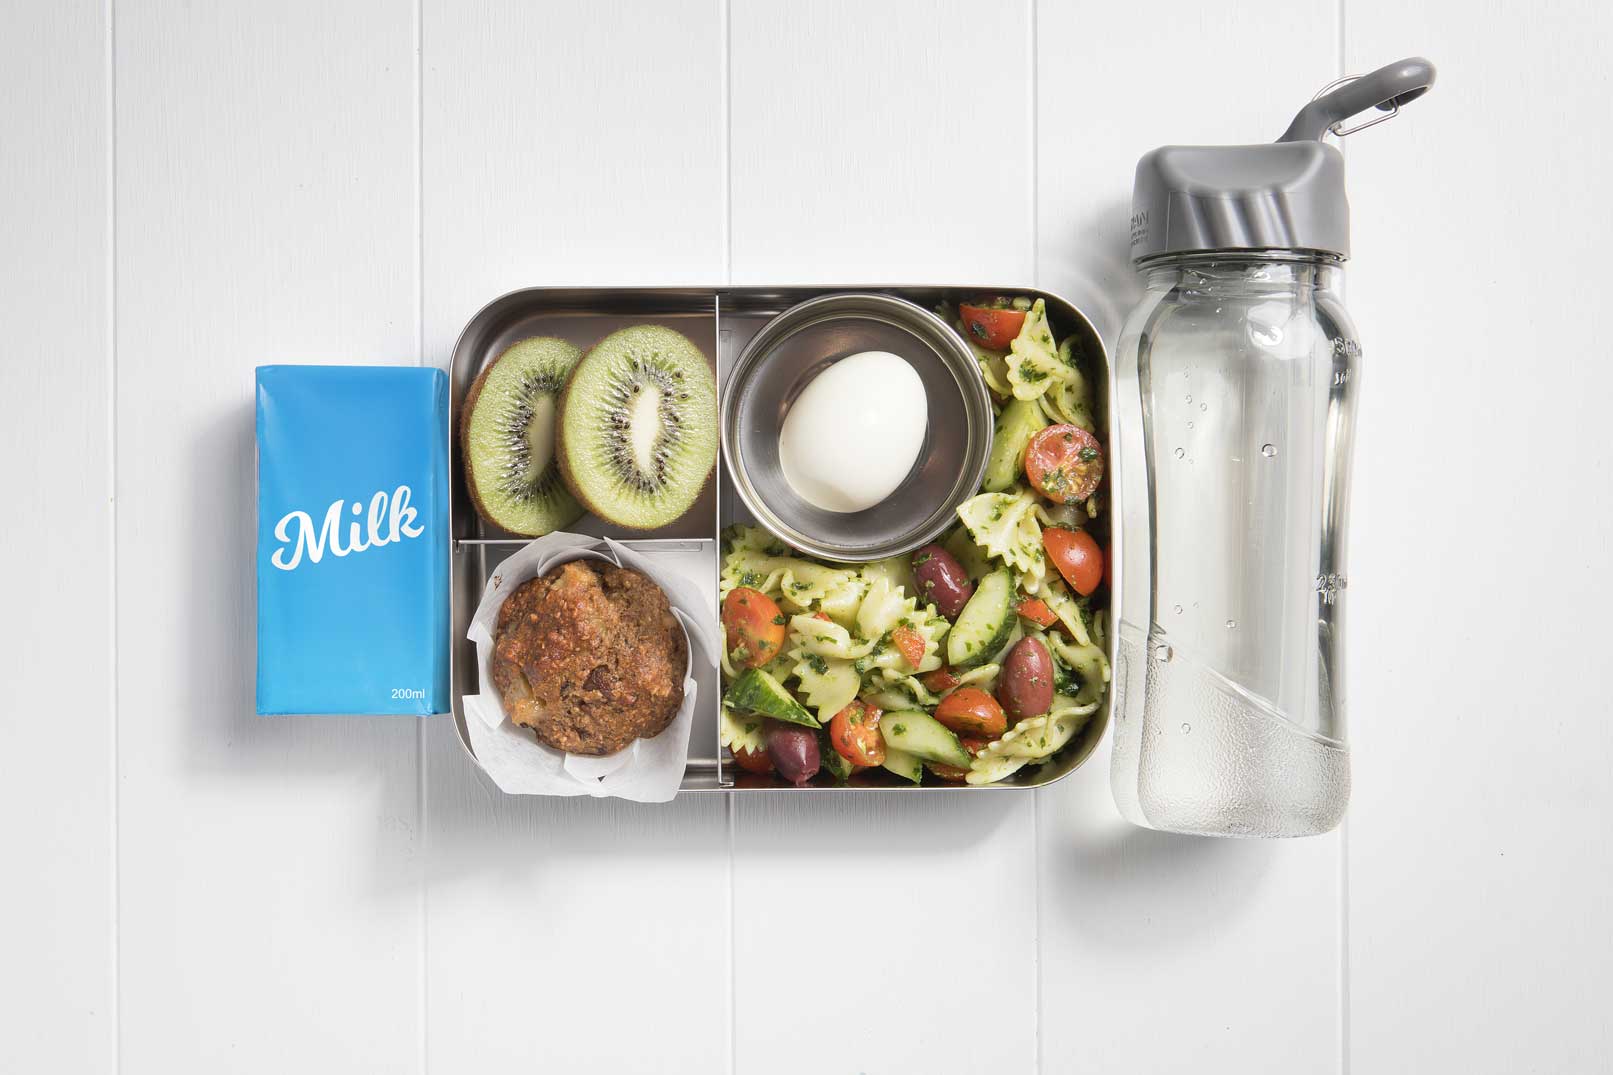 Top view of packed lunch box with salad, muffin, egg, kiwifruit, milk popper and a water bottle.